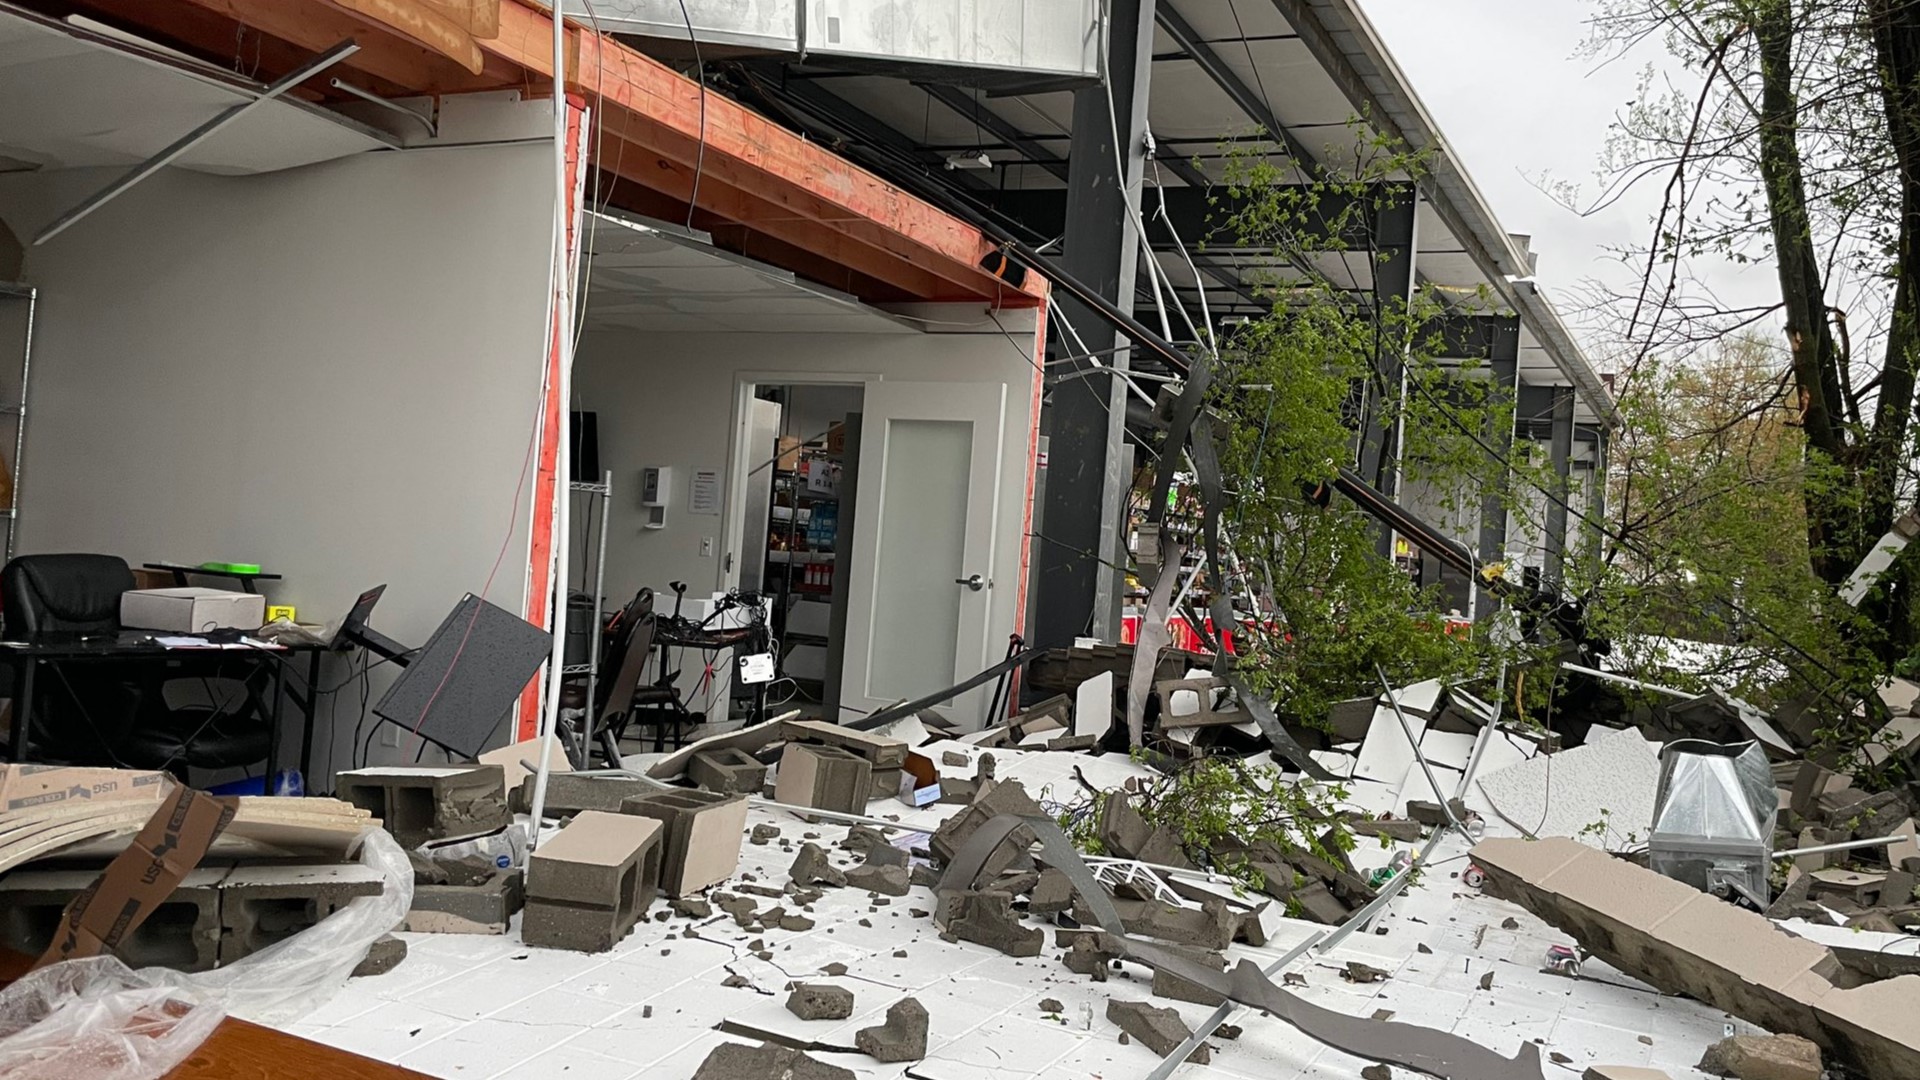 At a news conference with Mayor Craig Greenberg Wednesday night, NWS Louisville said that the suspected tornado first hit on Robards Lane at 5:05 p.m.